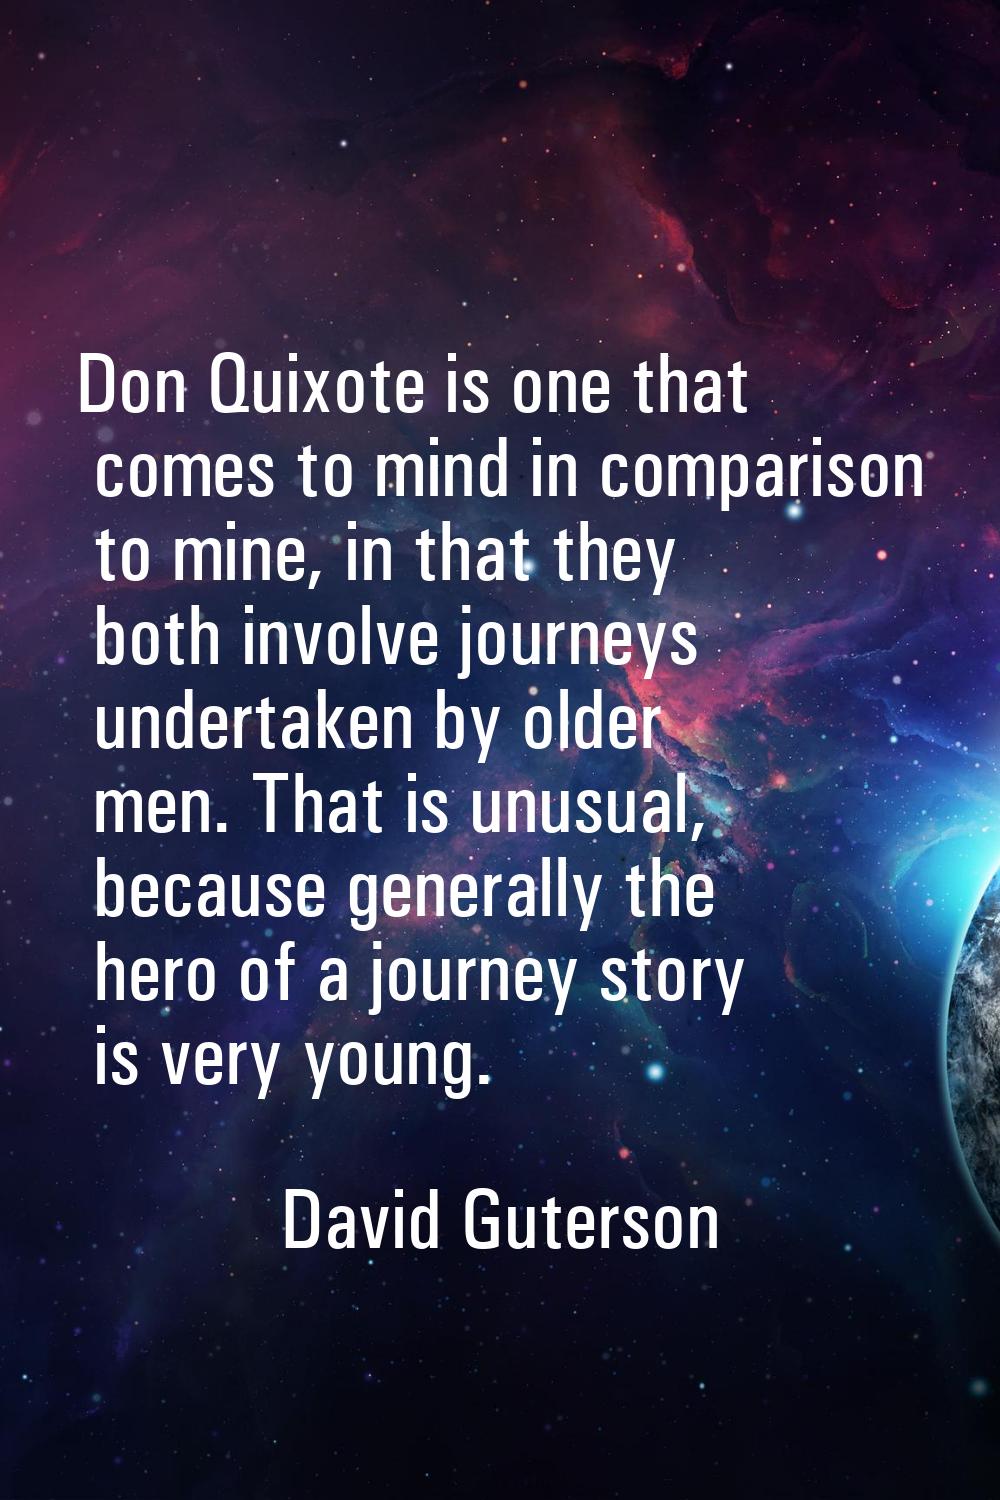 Don Quixote is one that comes to mind in comparison to mine, in that they both involve journeys und